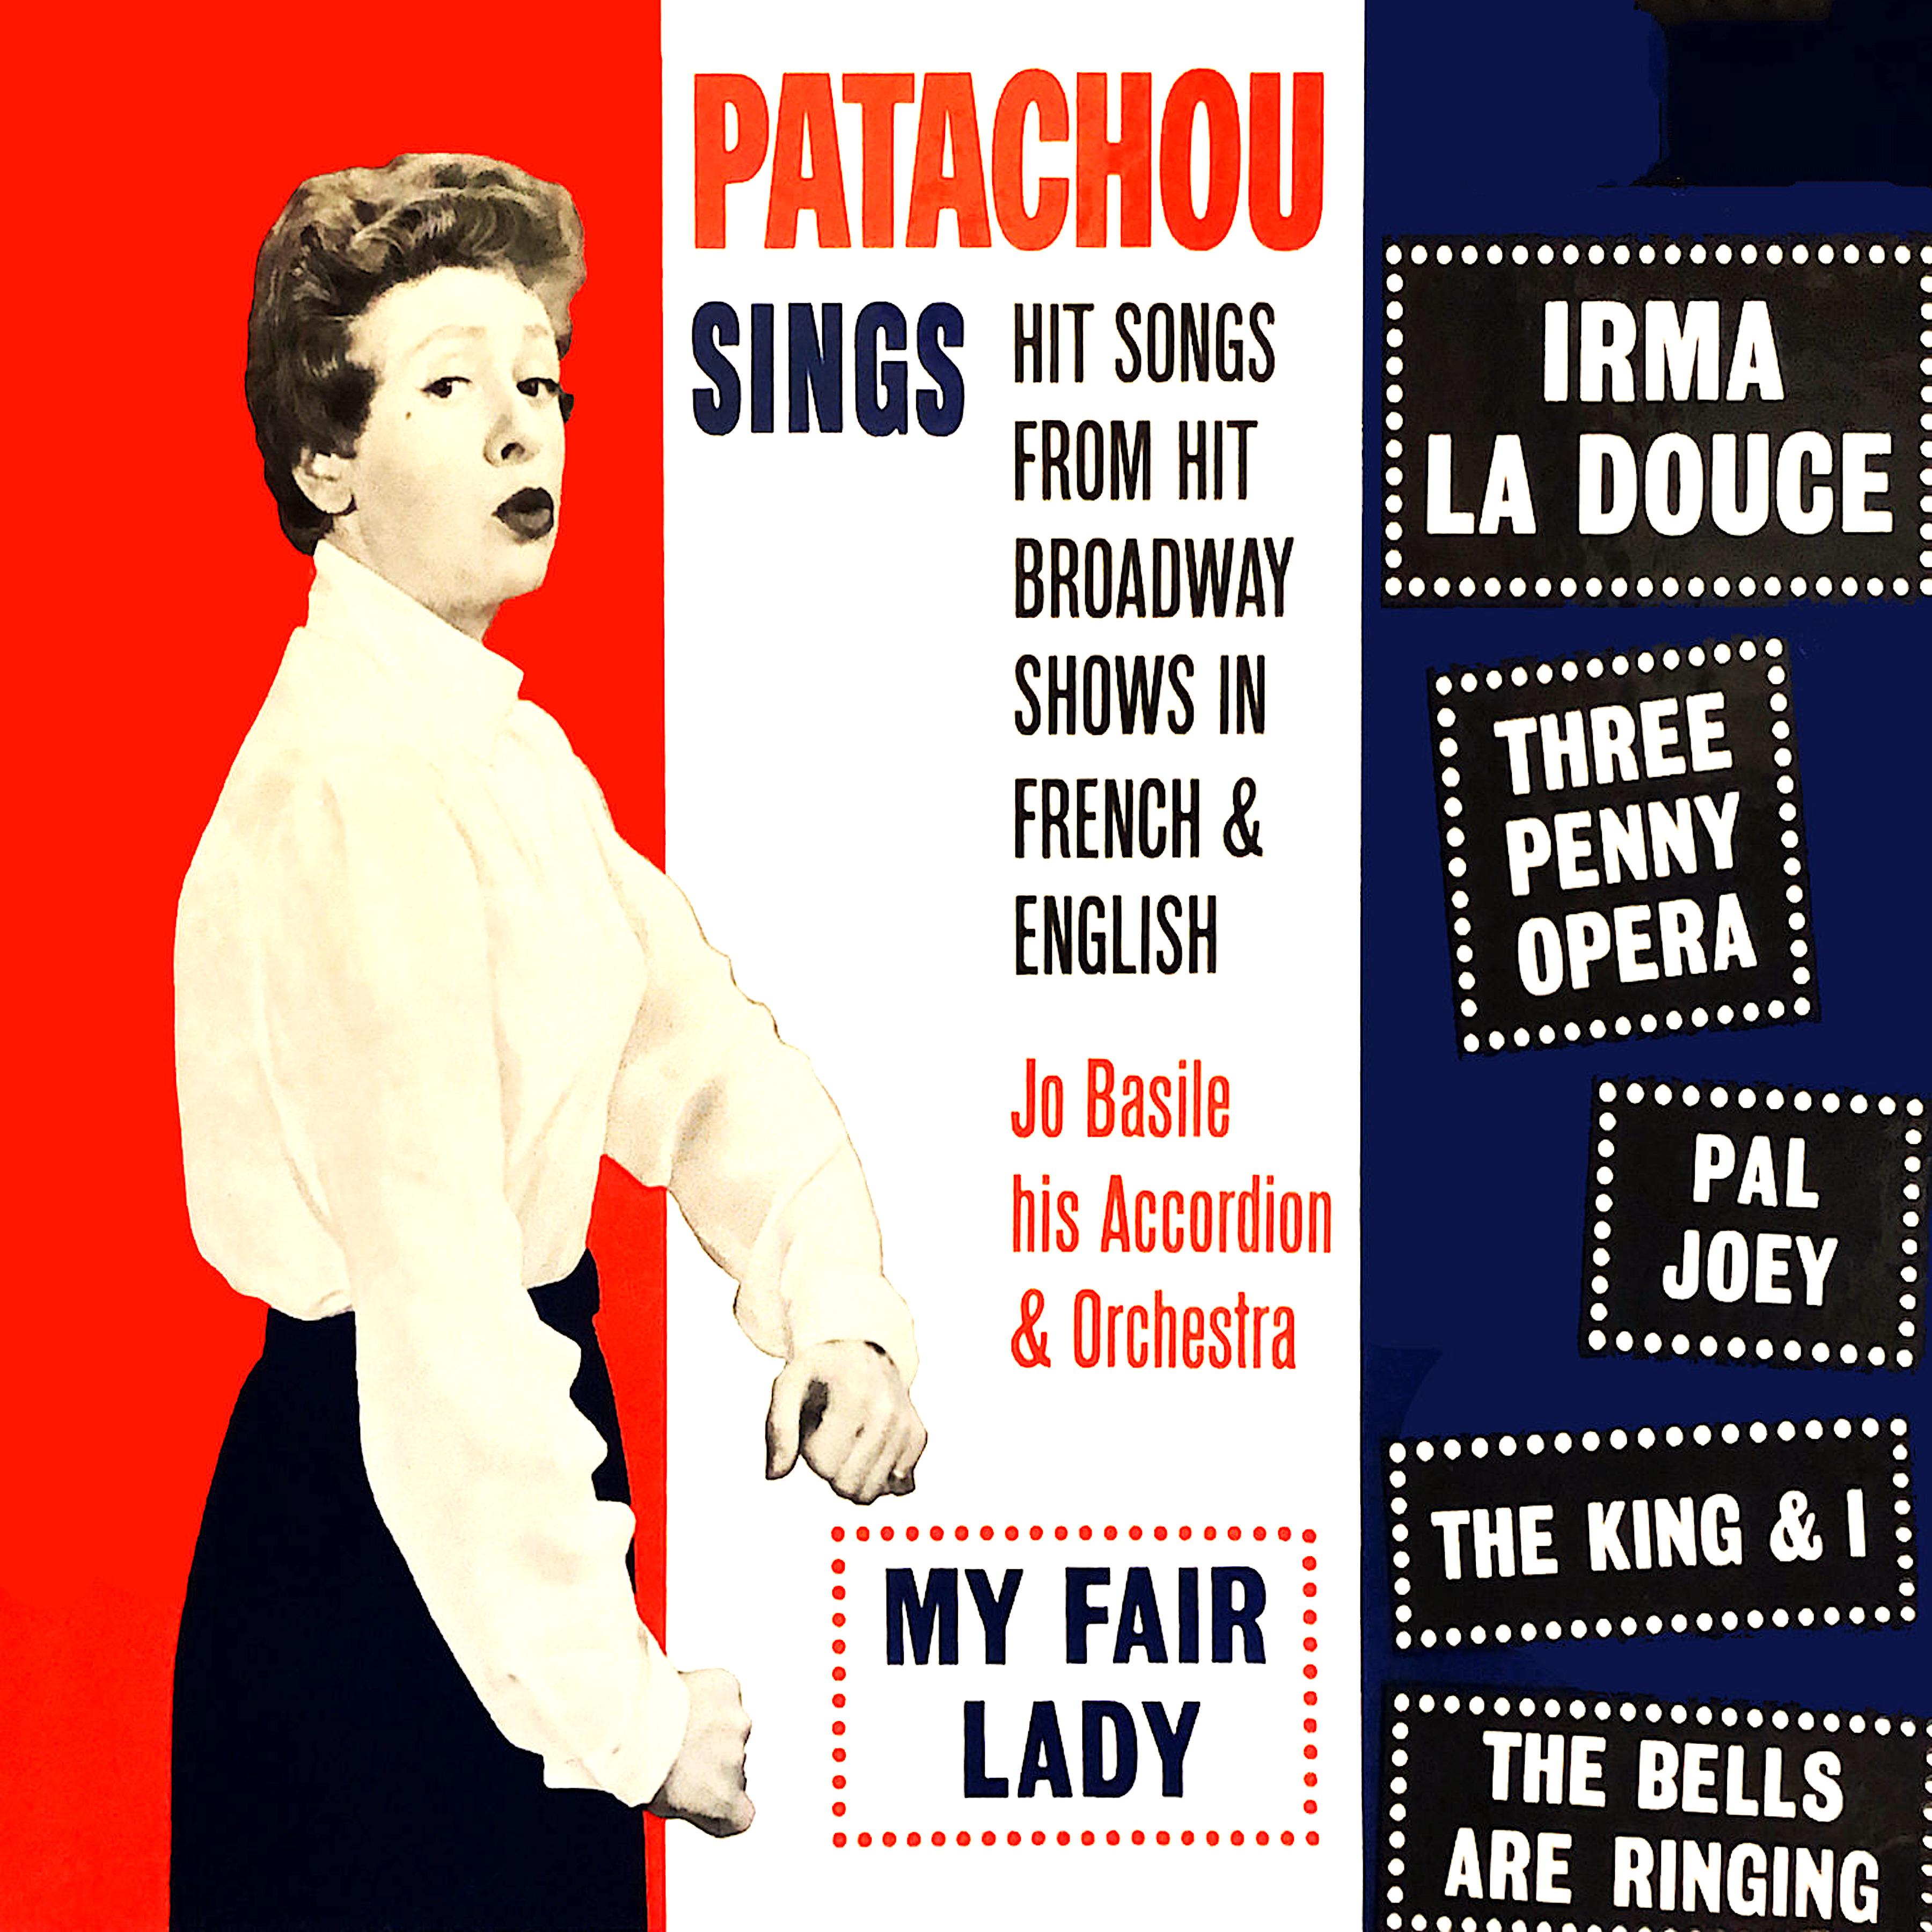 Patachou - Mack The Knife (From The Three Penny Opera) (Remastered)